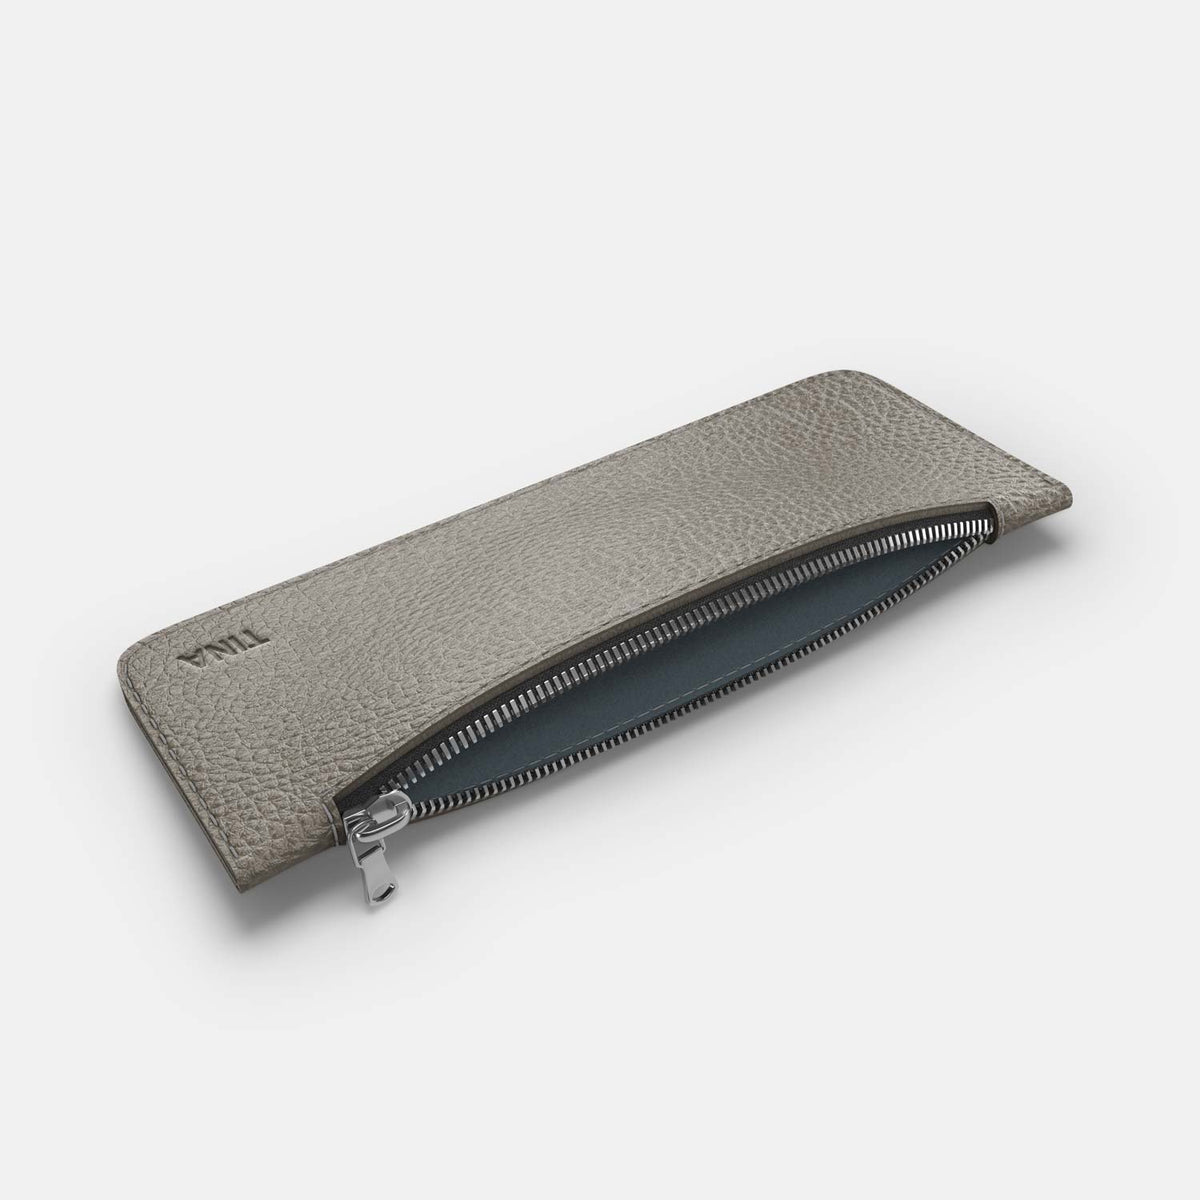 Leather Pencil Case - Grey and Grey - RYAN London